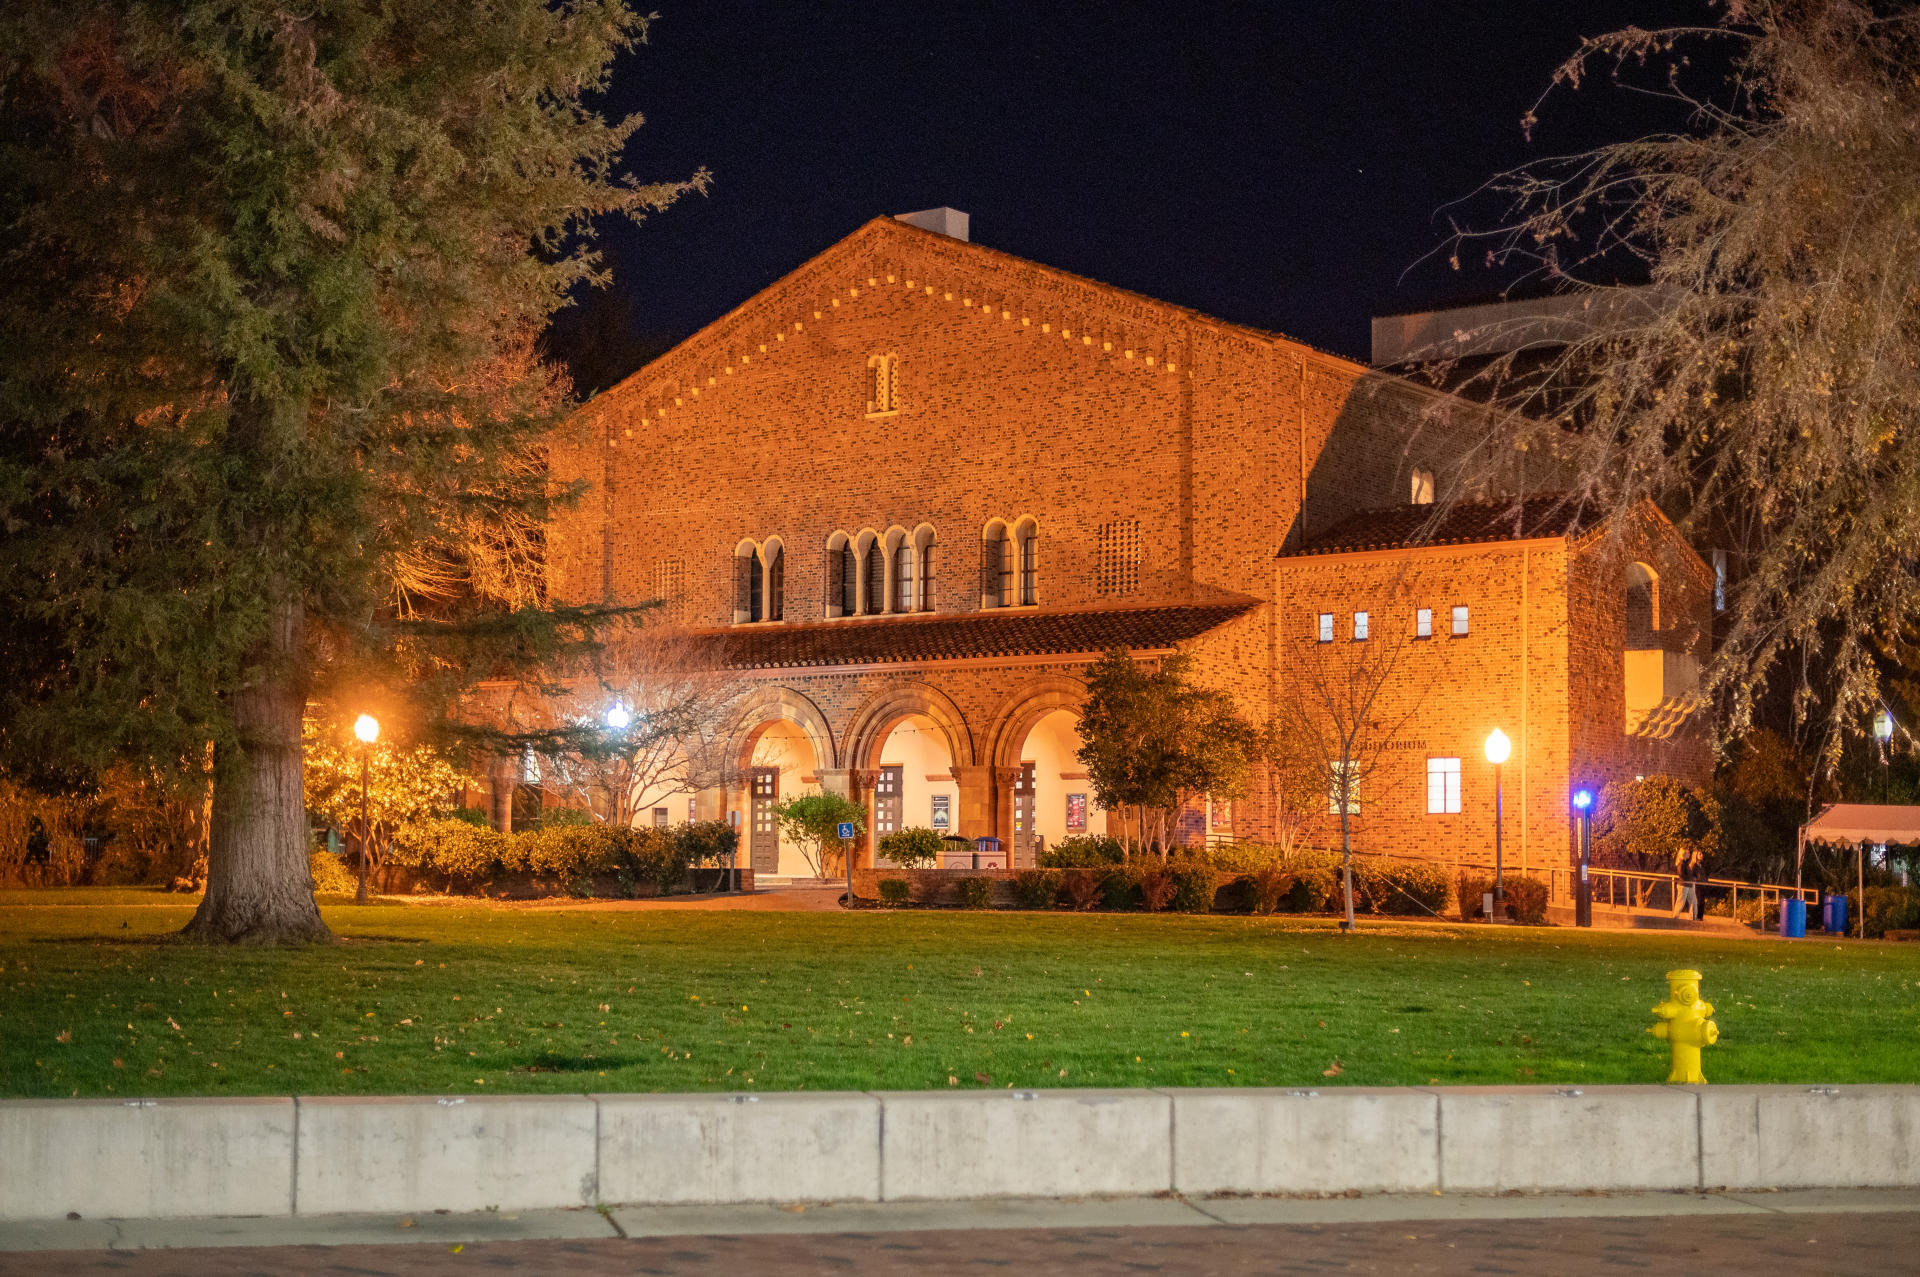 Lights illuminate the exterior of an academic building on a college campus.